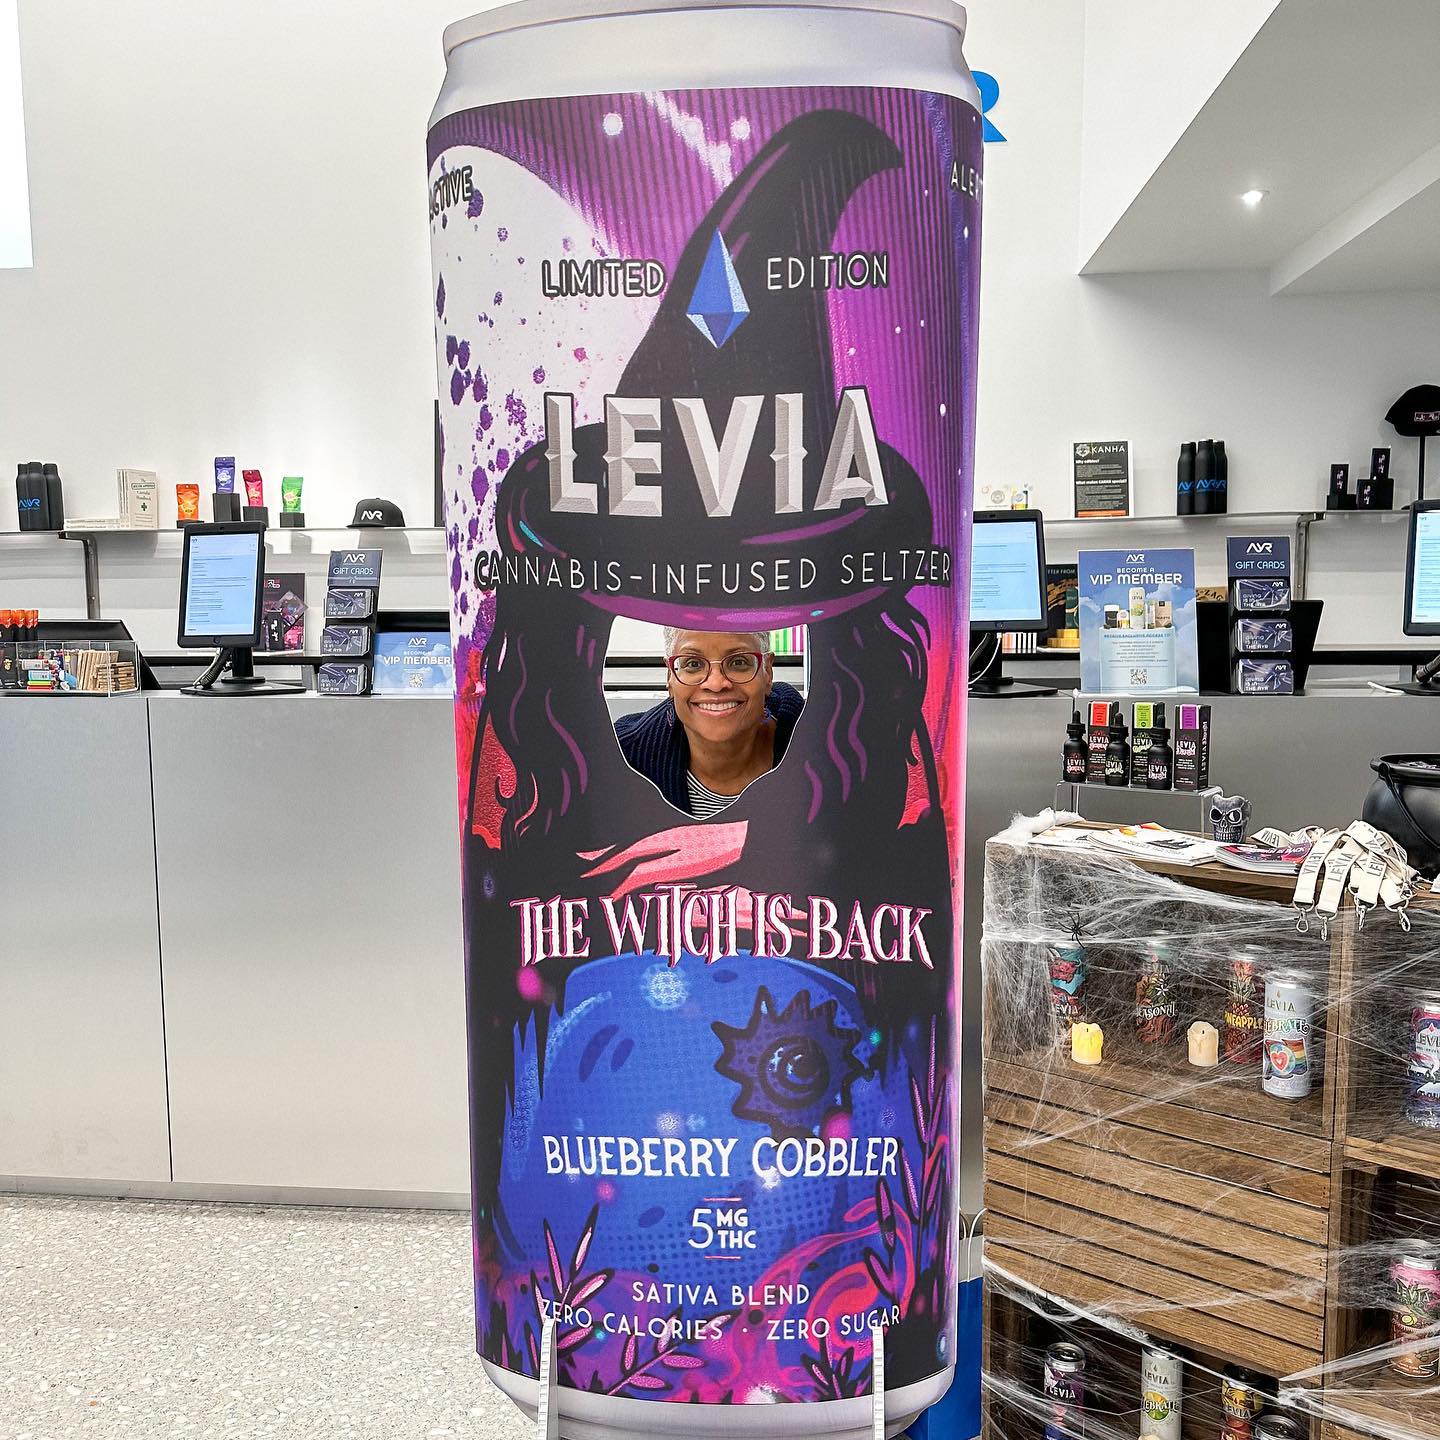 The many faces of the LEVIA witch 🧹 Our limited edition Blueberry Cobbler flavor is still available Find it at one of our partners near you